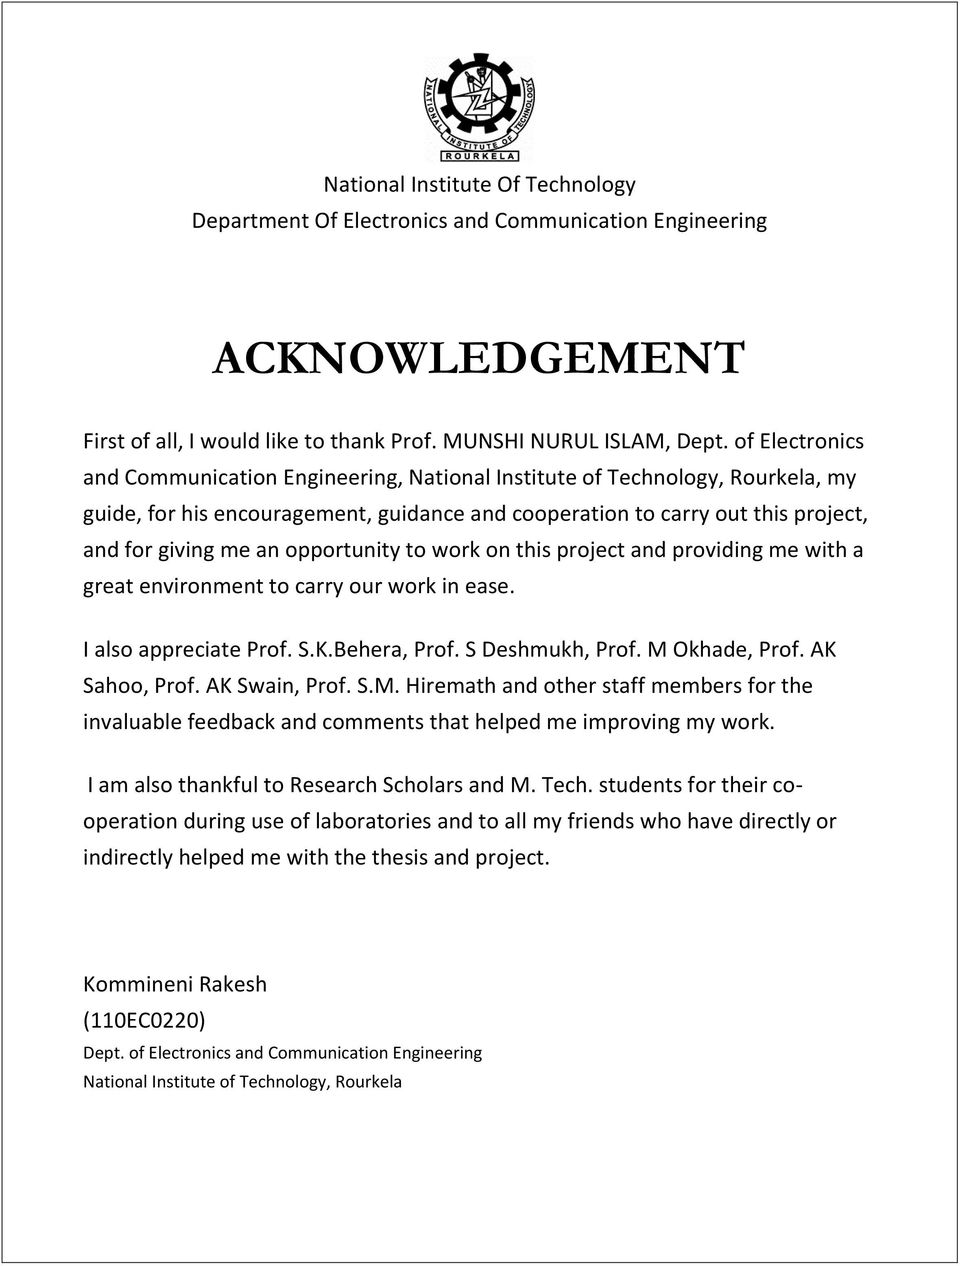 opportunity to work on this project and providing me with a great environment to carry our work in ease. I also appreciate Prof. S.K.Behera, Prof. S Deshmukh, Prof. M Okhade, Prof. AK Sahoo, Prof.